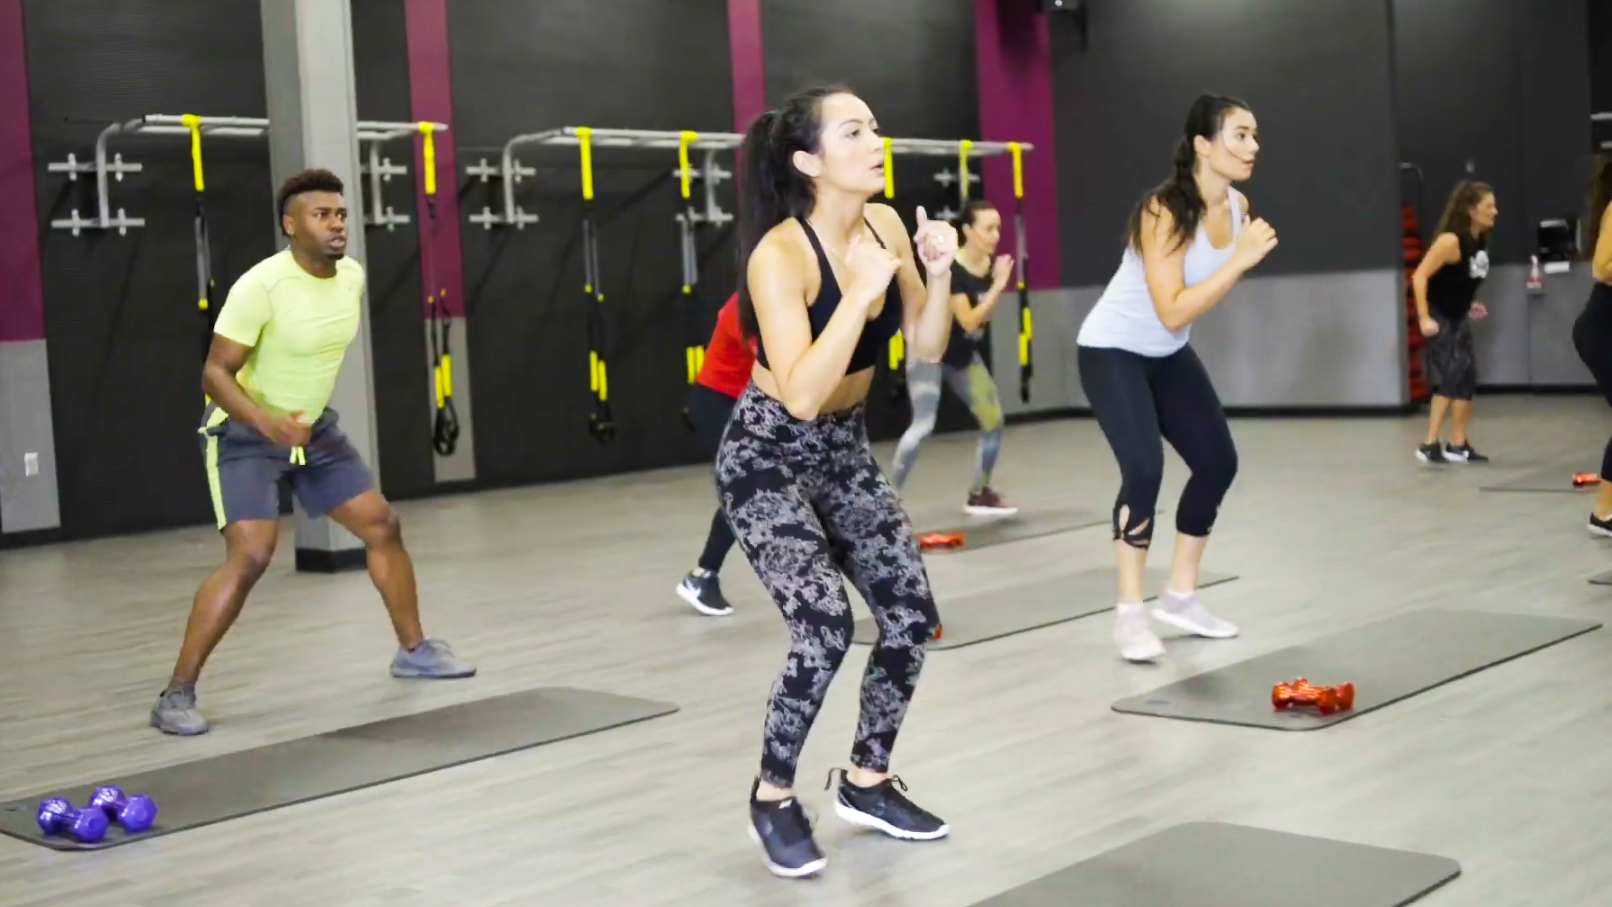 Crunch Fitness Opens 38,000 Square-Foot Facility in Tamarac